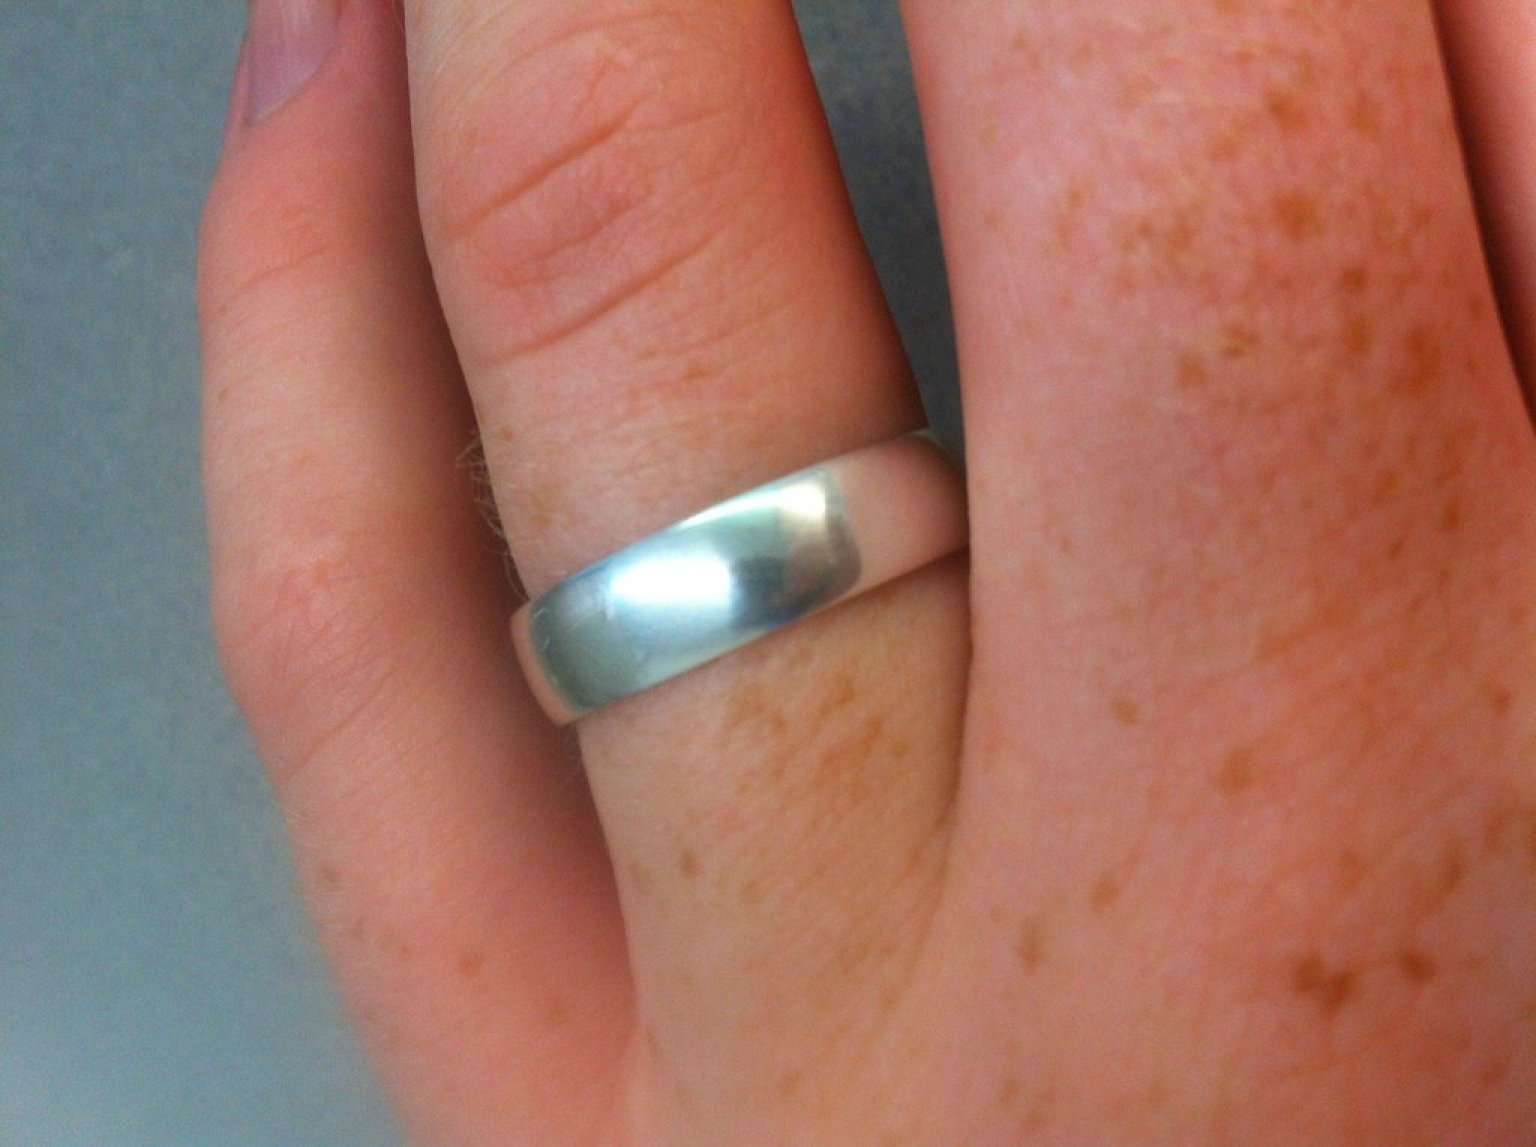 DIY Wedding Ring Is Made Out Of 50-Cent Coin (PHOTO) | HuffPost